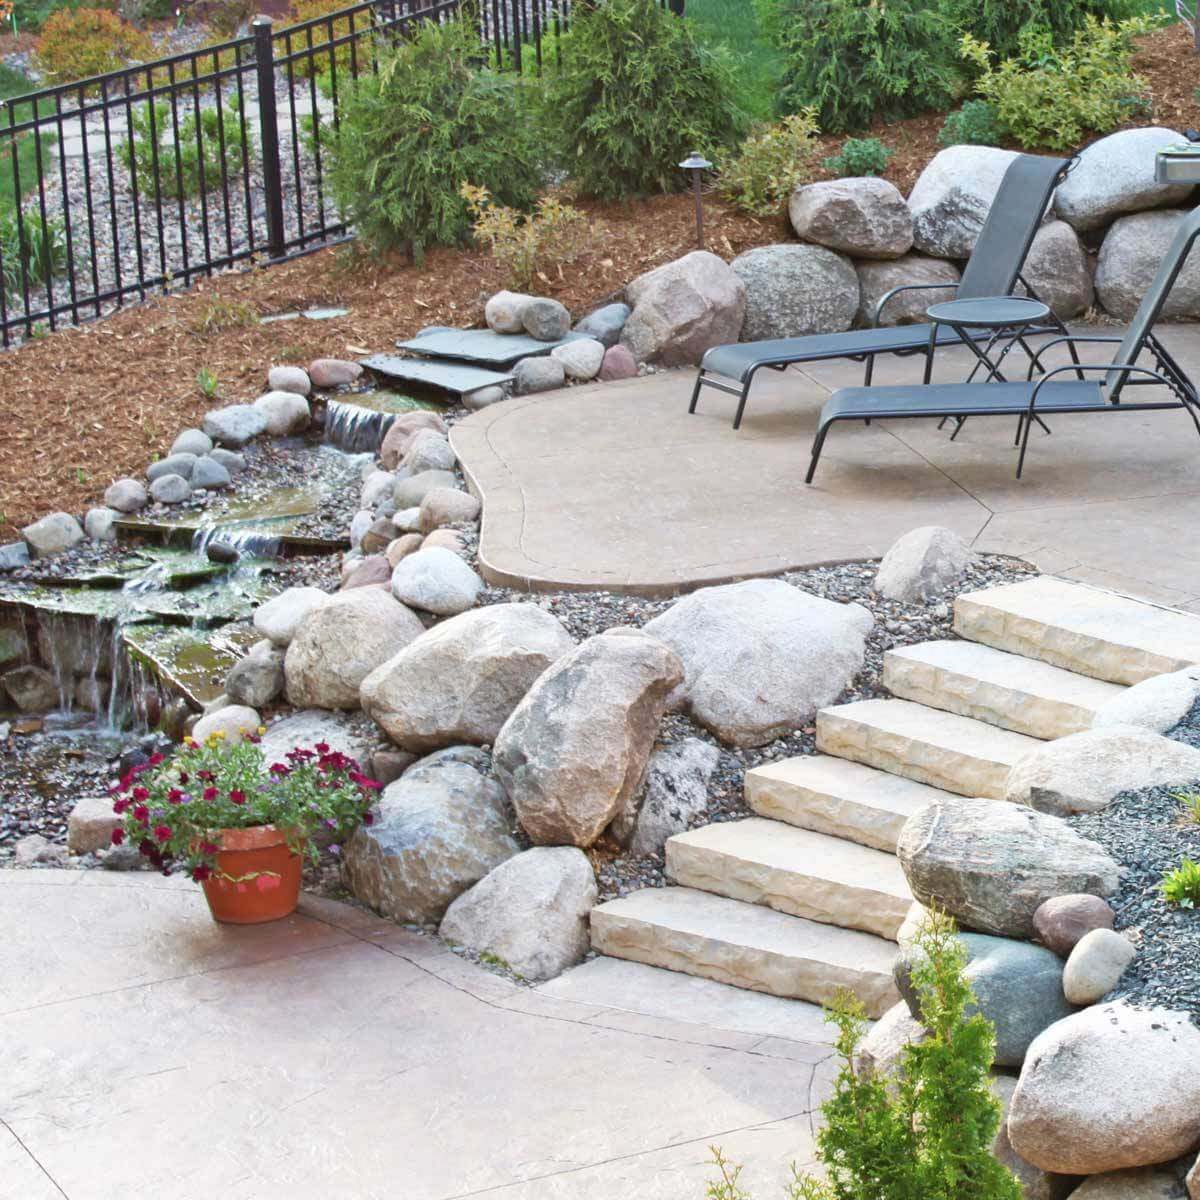 https://www.familyhandyman.com/wp-content/uploads/2018/03/multi-level-patio-with-water-feature.jpg